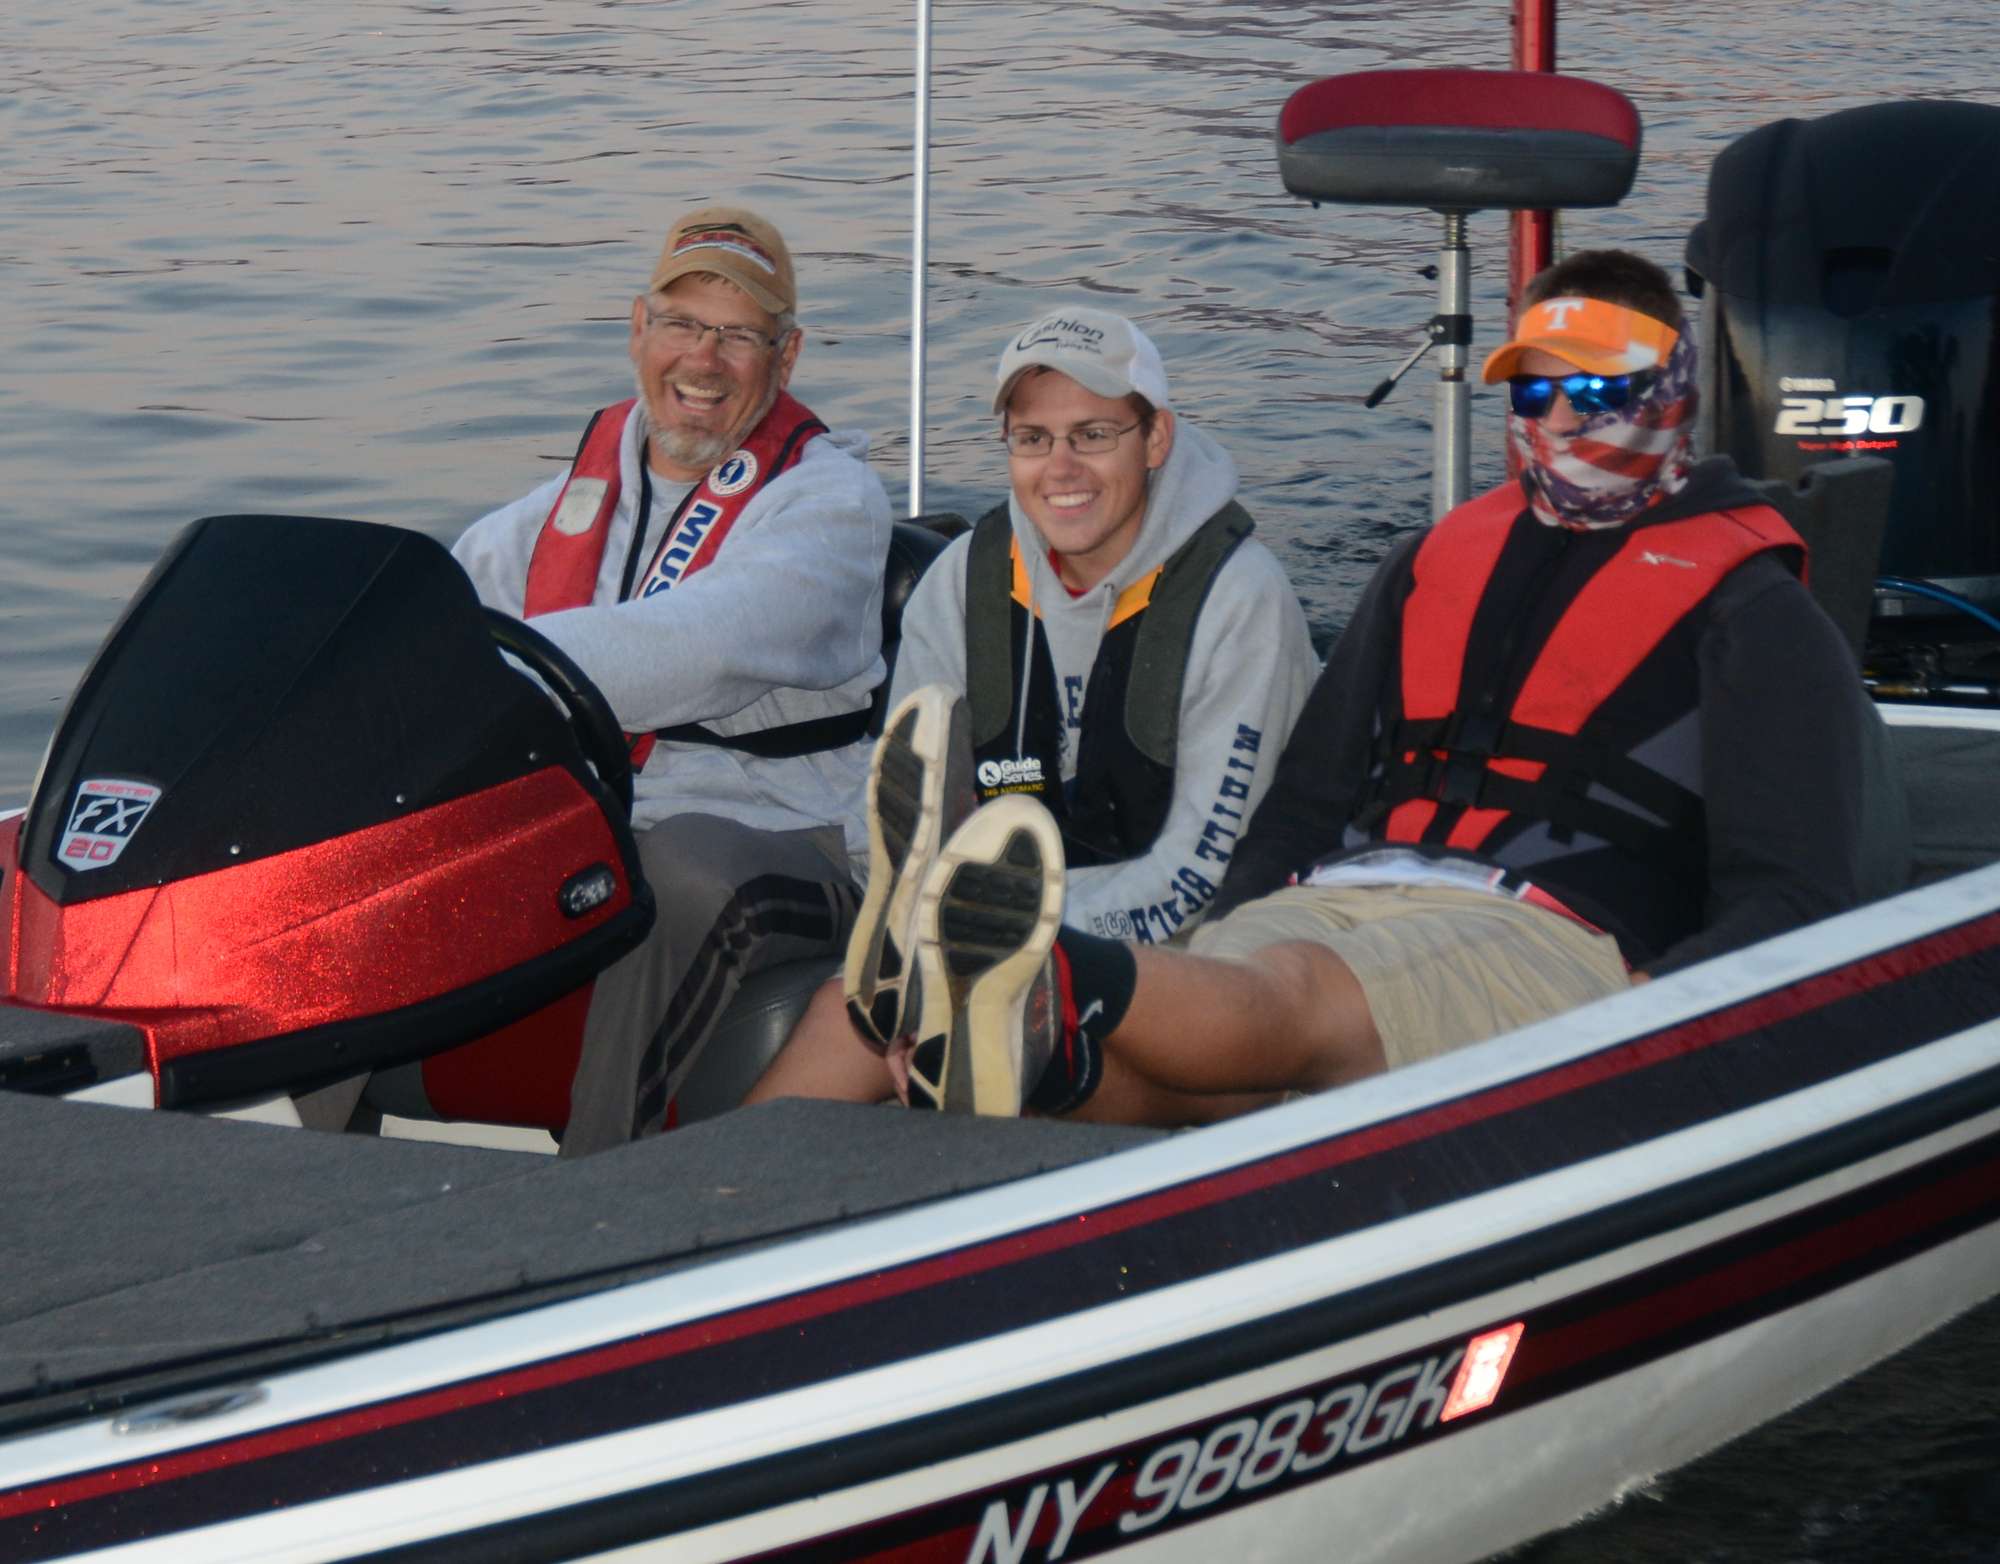 The New York team is all smiles. Joe Matt drives, and Michael Arndt and Ryan Hujar will be fishing today.